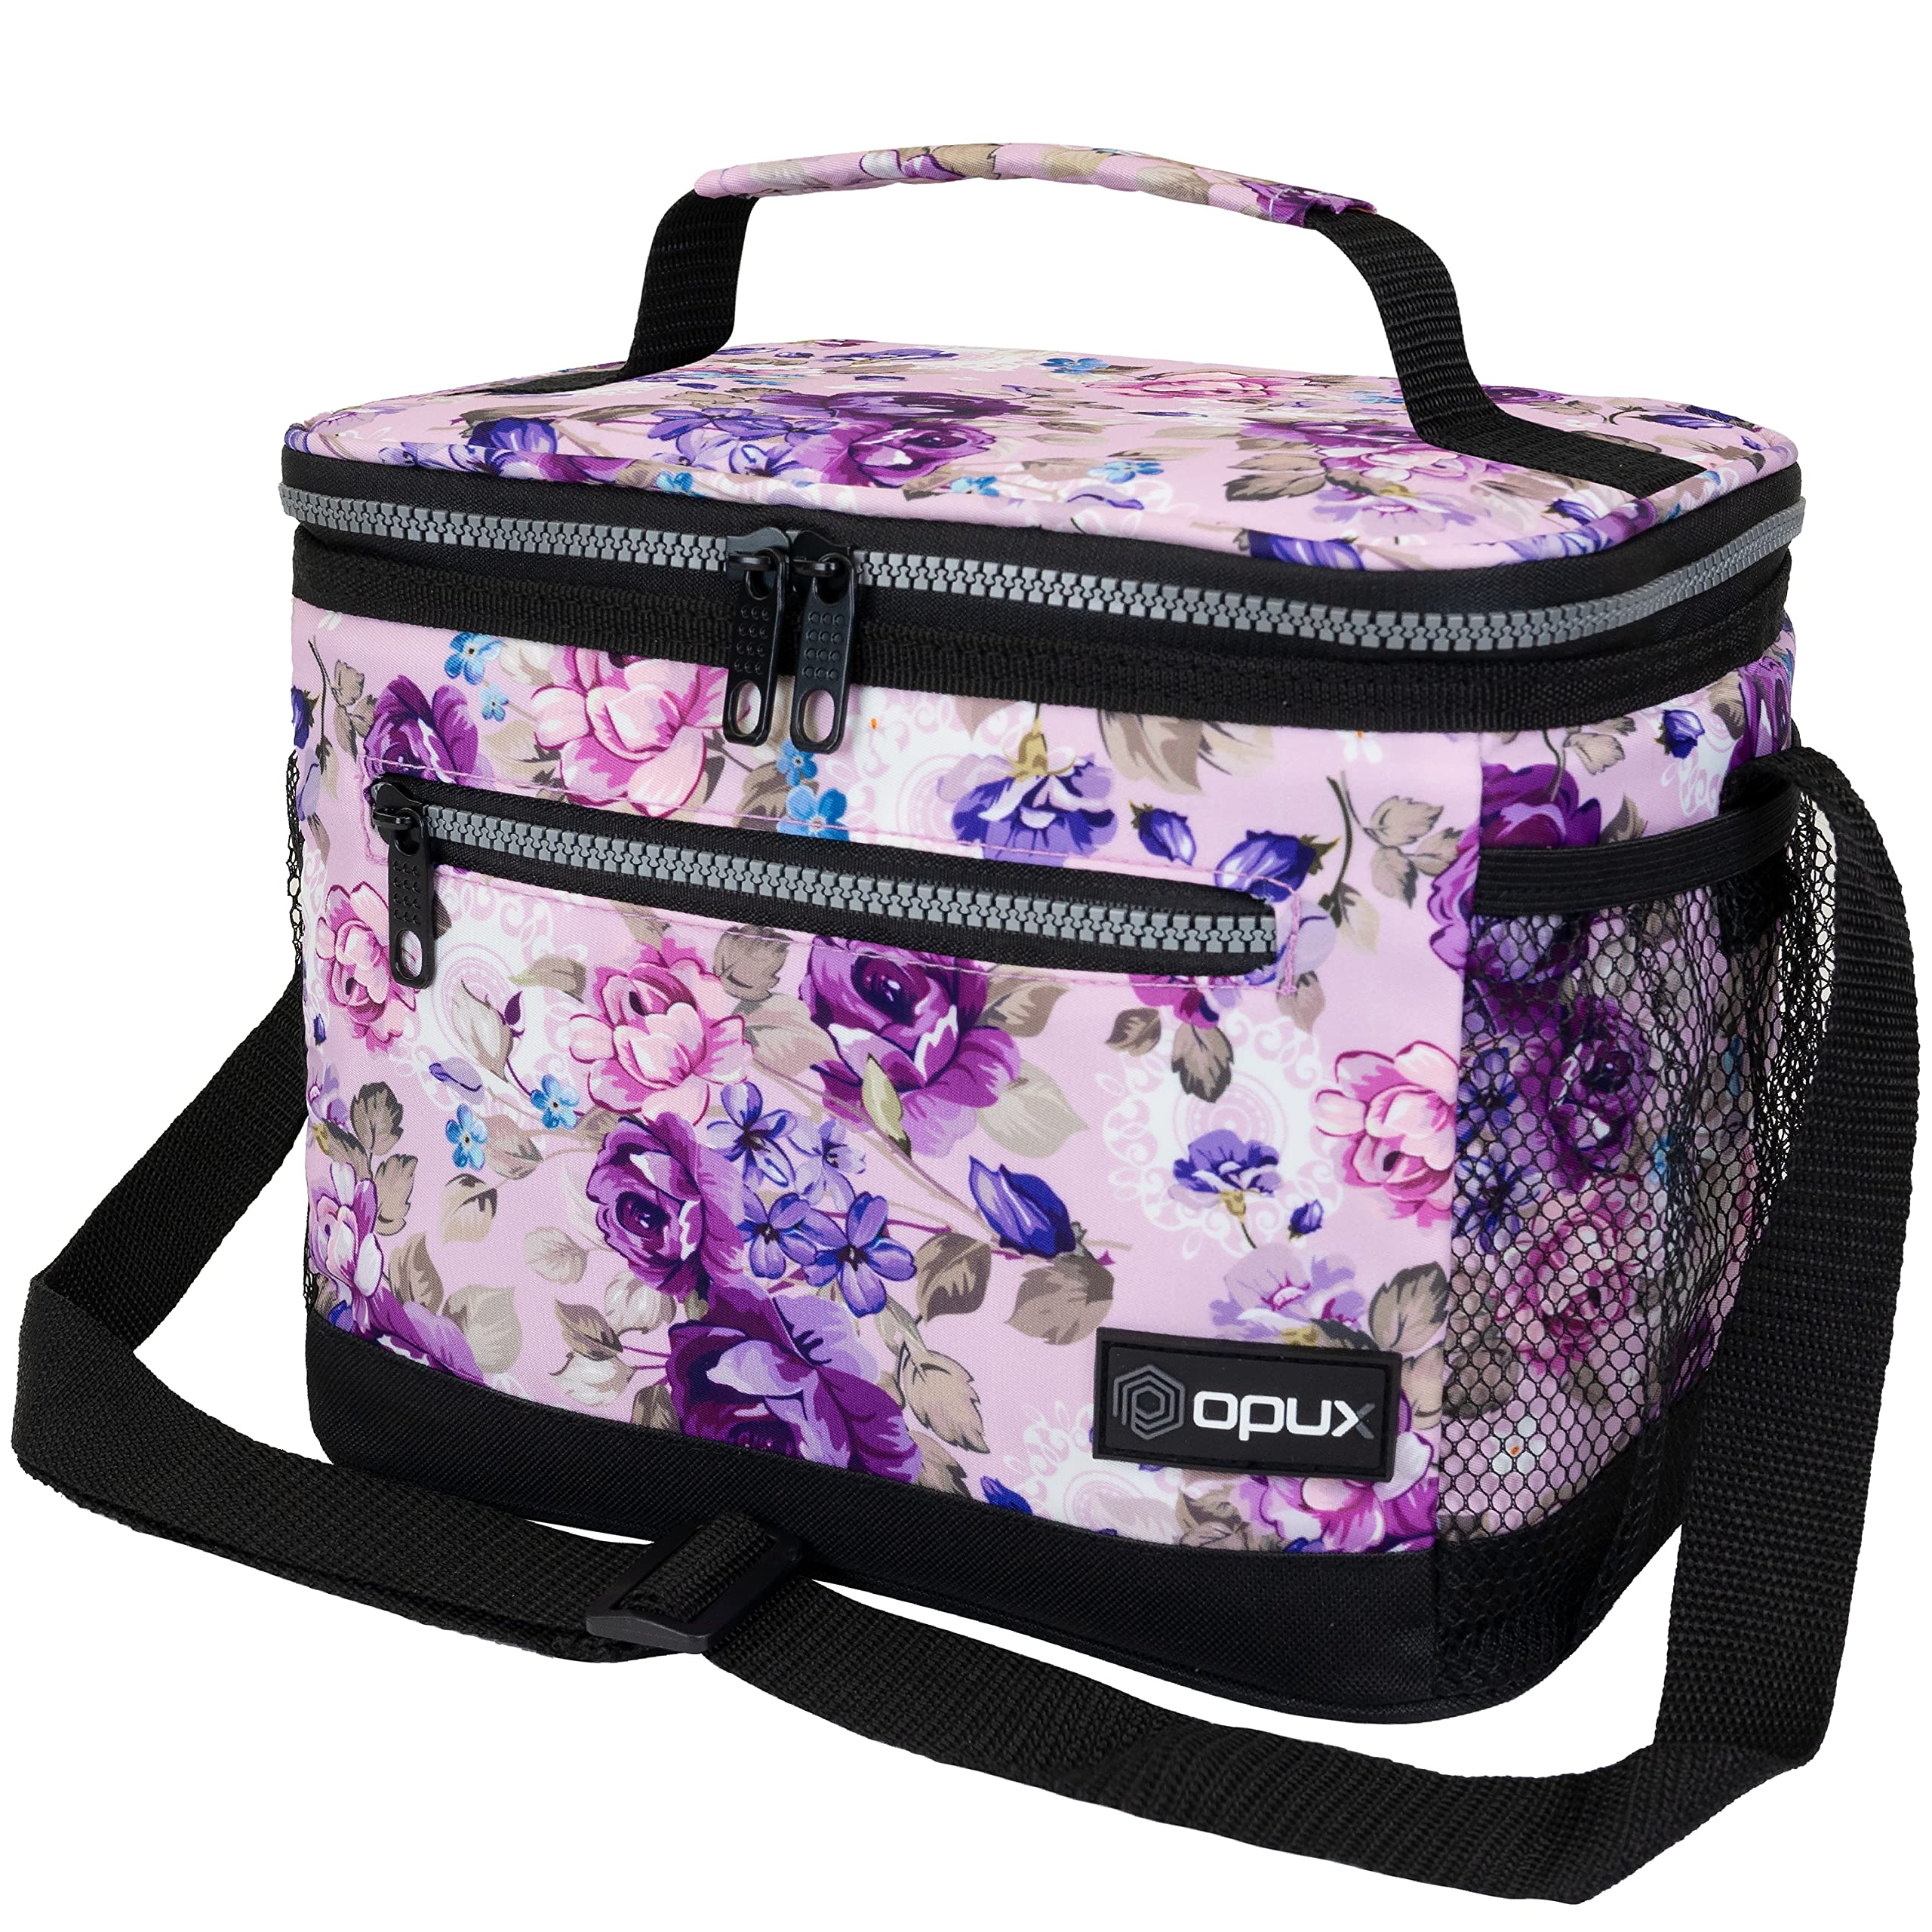 OPUX Insulated Lunch Box for Women Men, Leakproof Thermal Lunch Bag for Work, Reusable Lunch cooler Tote, Soft School Lunch Pail